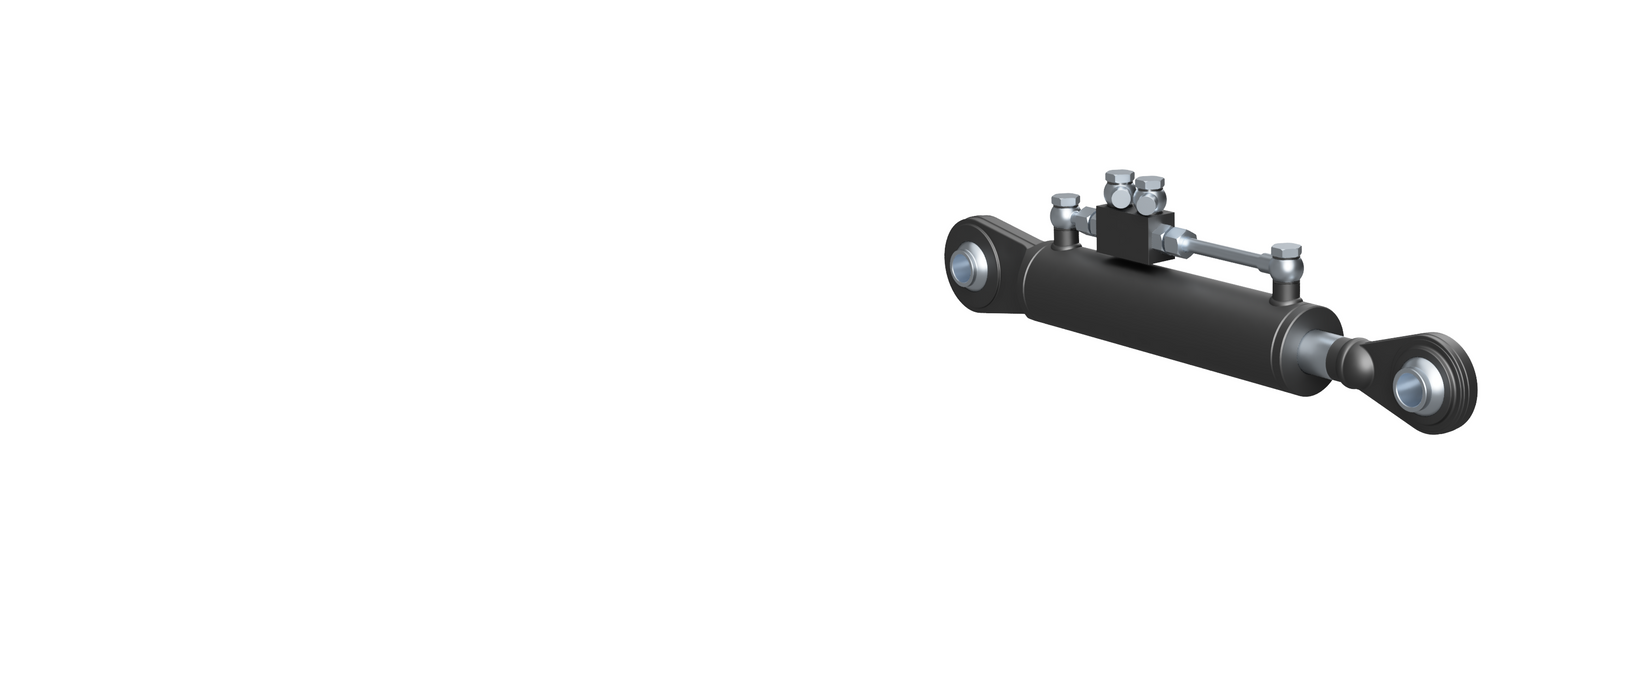 A close up render of a black hydraulic cylinder on a white background.